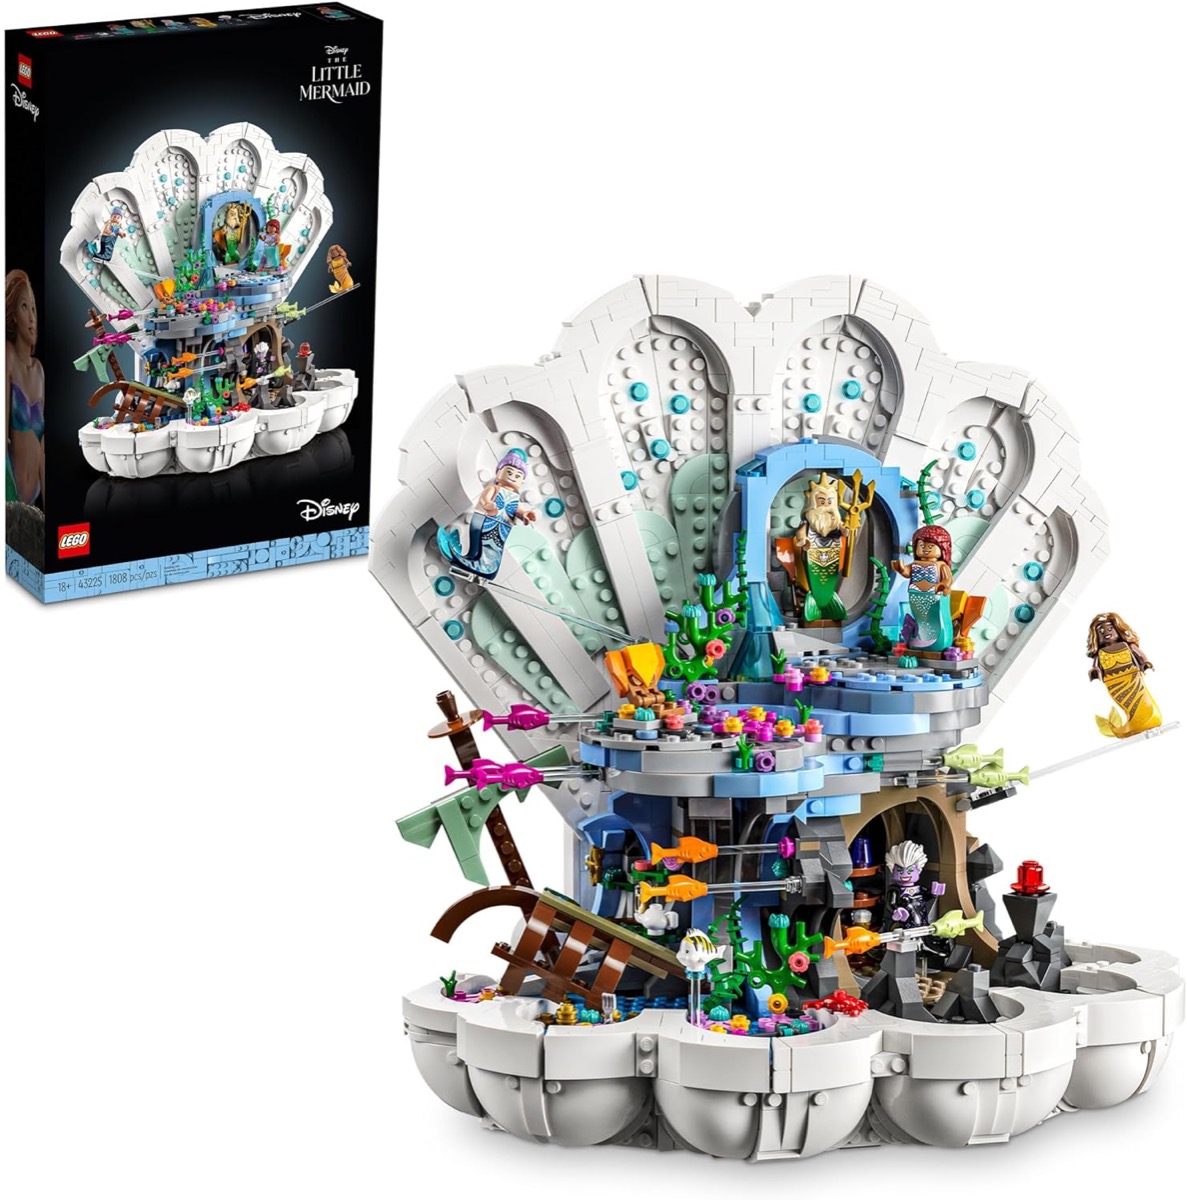 A LEGO clamshell throne from "The Little Mermaid" 